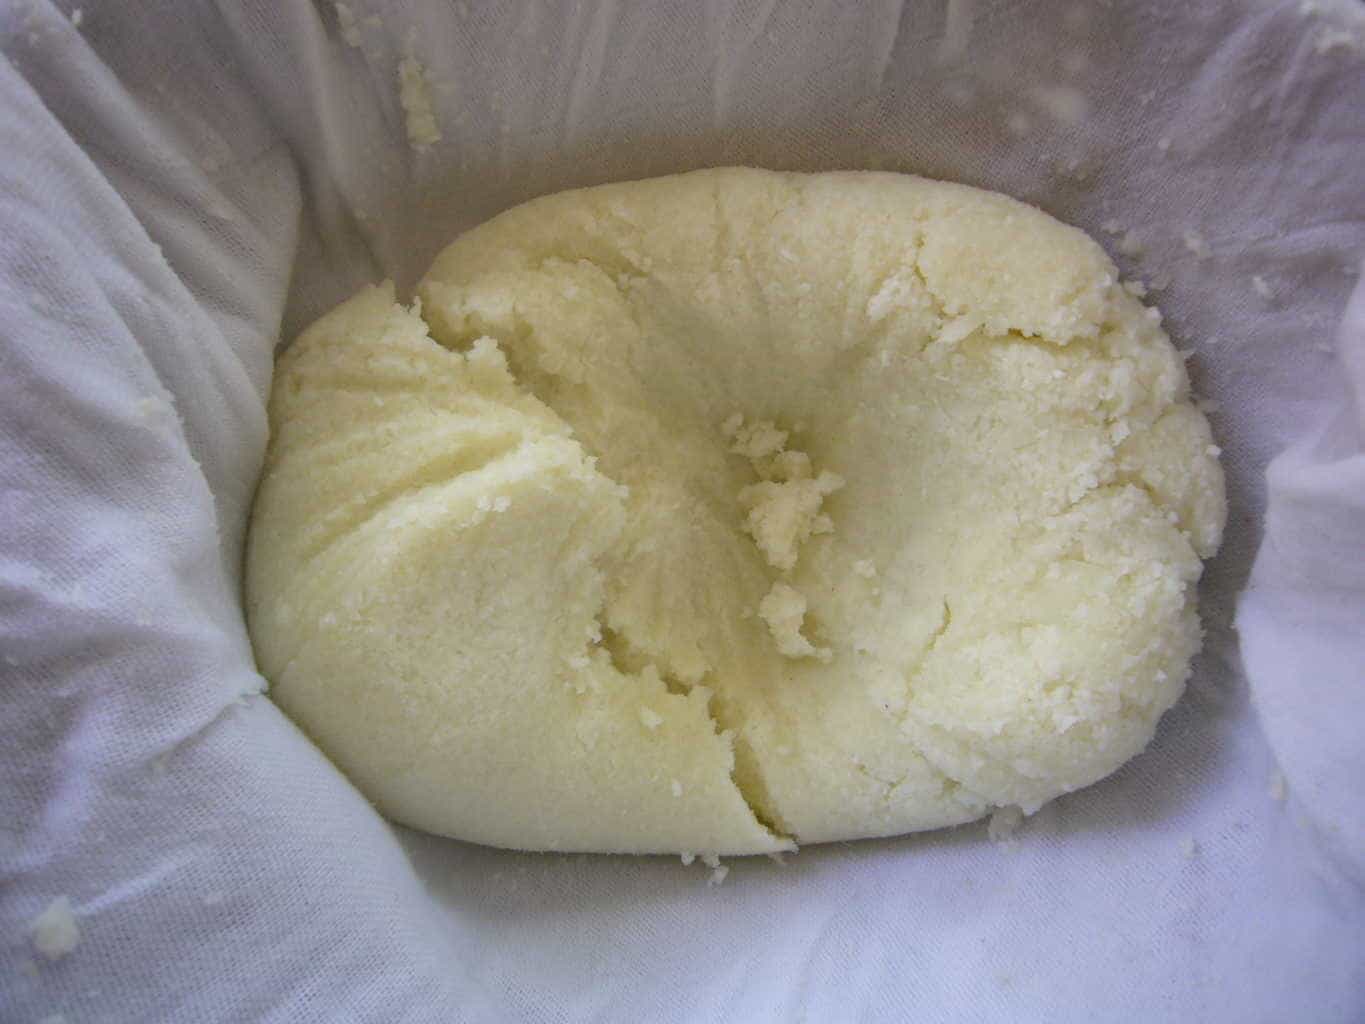 Processed cauliflower after squeezing out the moisture.